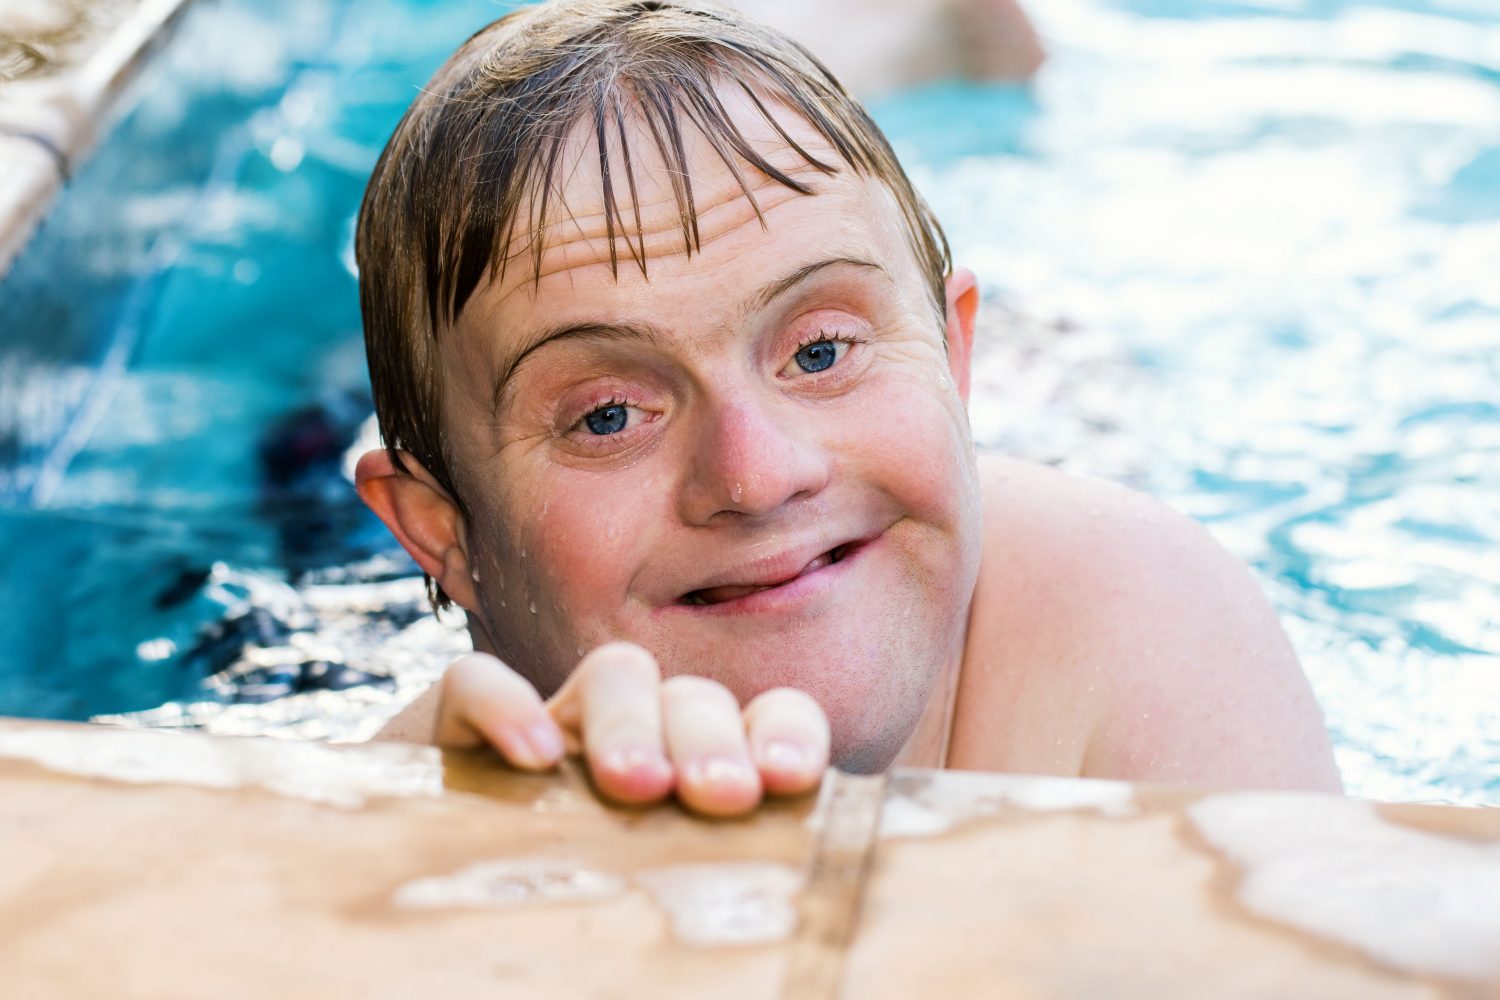 Man with Down syndrome in swimming pool